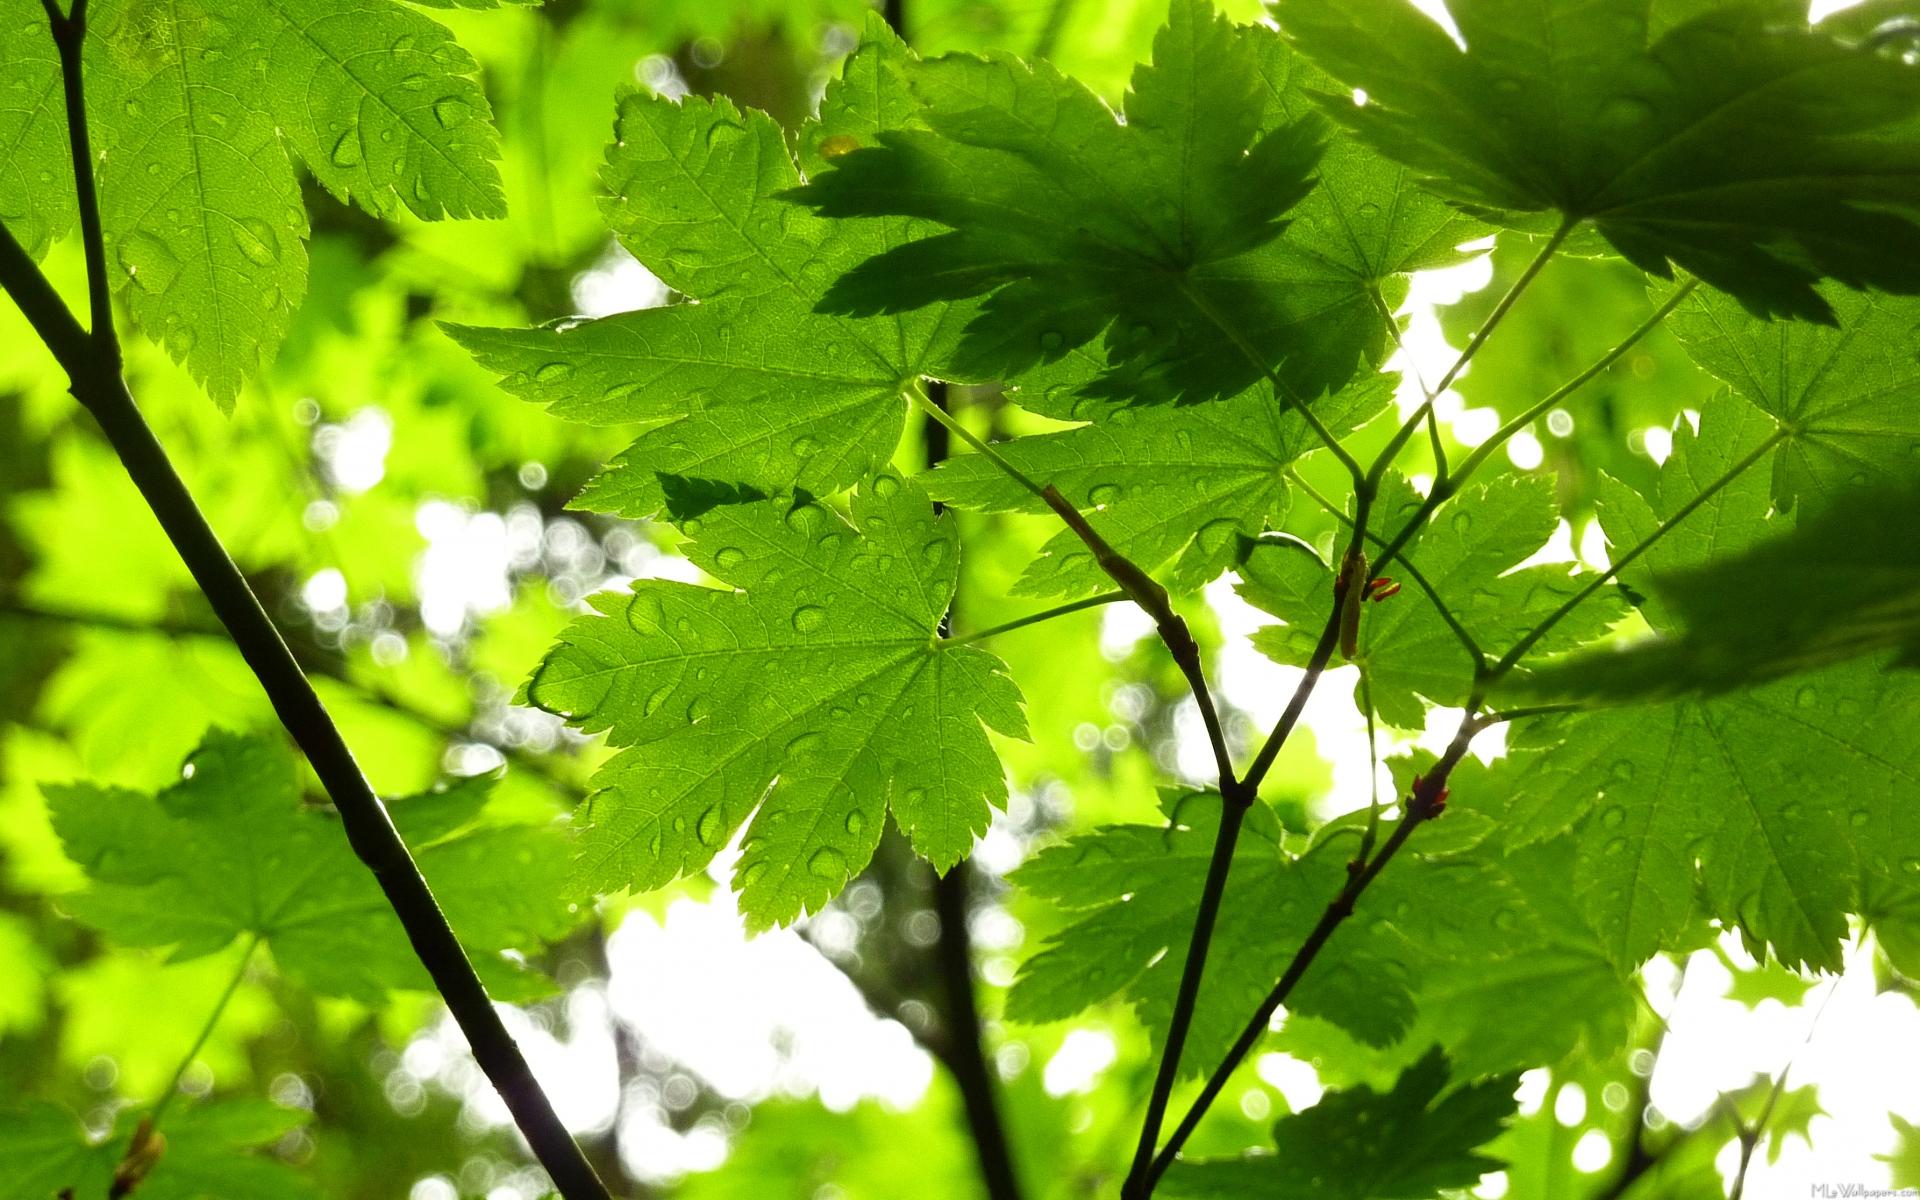 MLeWallpapers.com - Maple Leaves with Raindrops